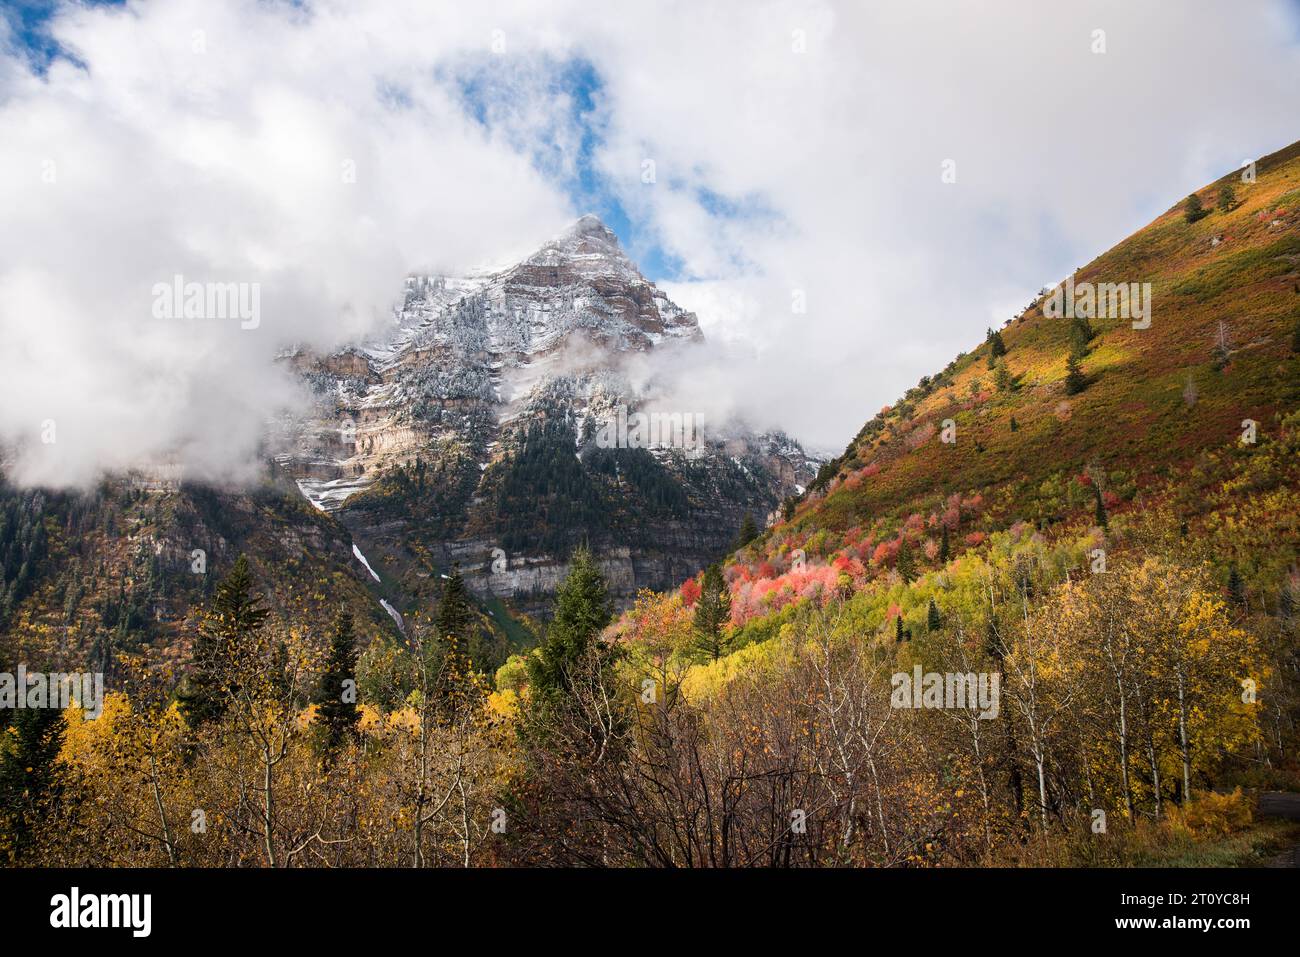 Autumn colors and majestic scenery along the famous Alpine Loop, Utah, USA. Stock Photo